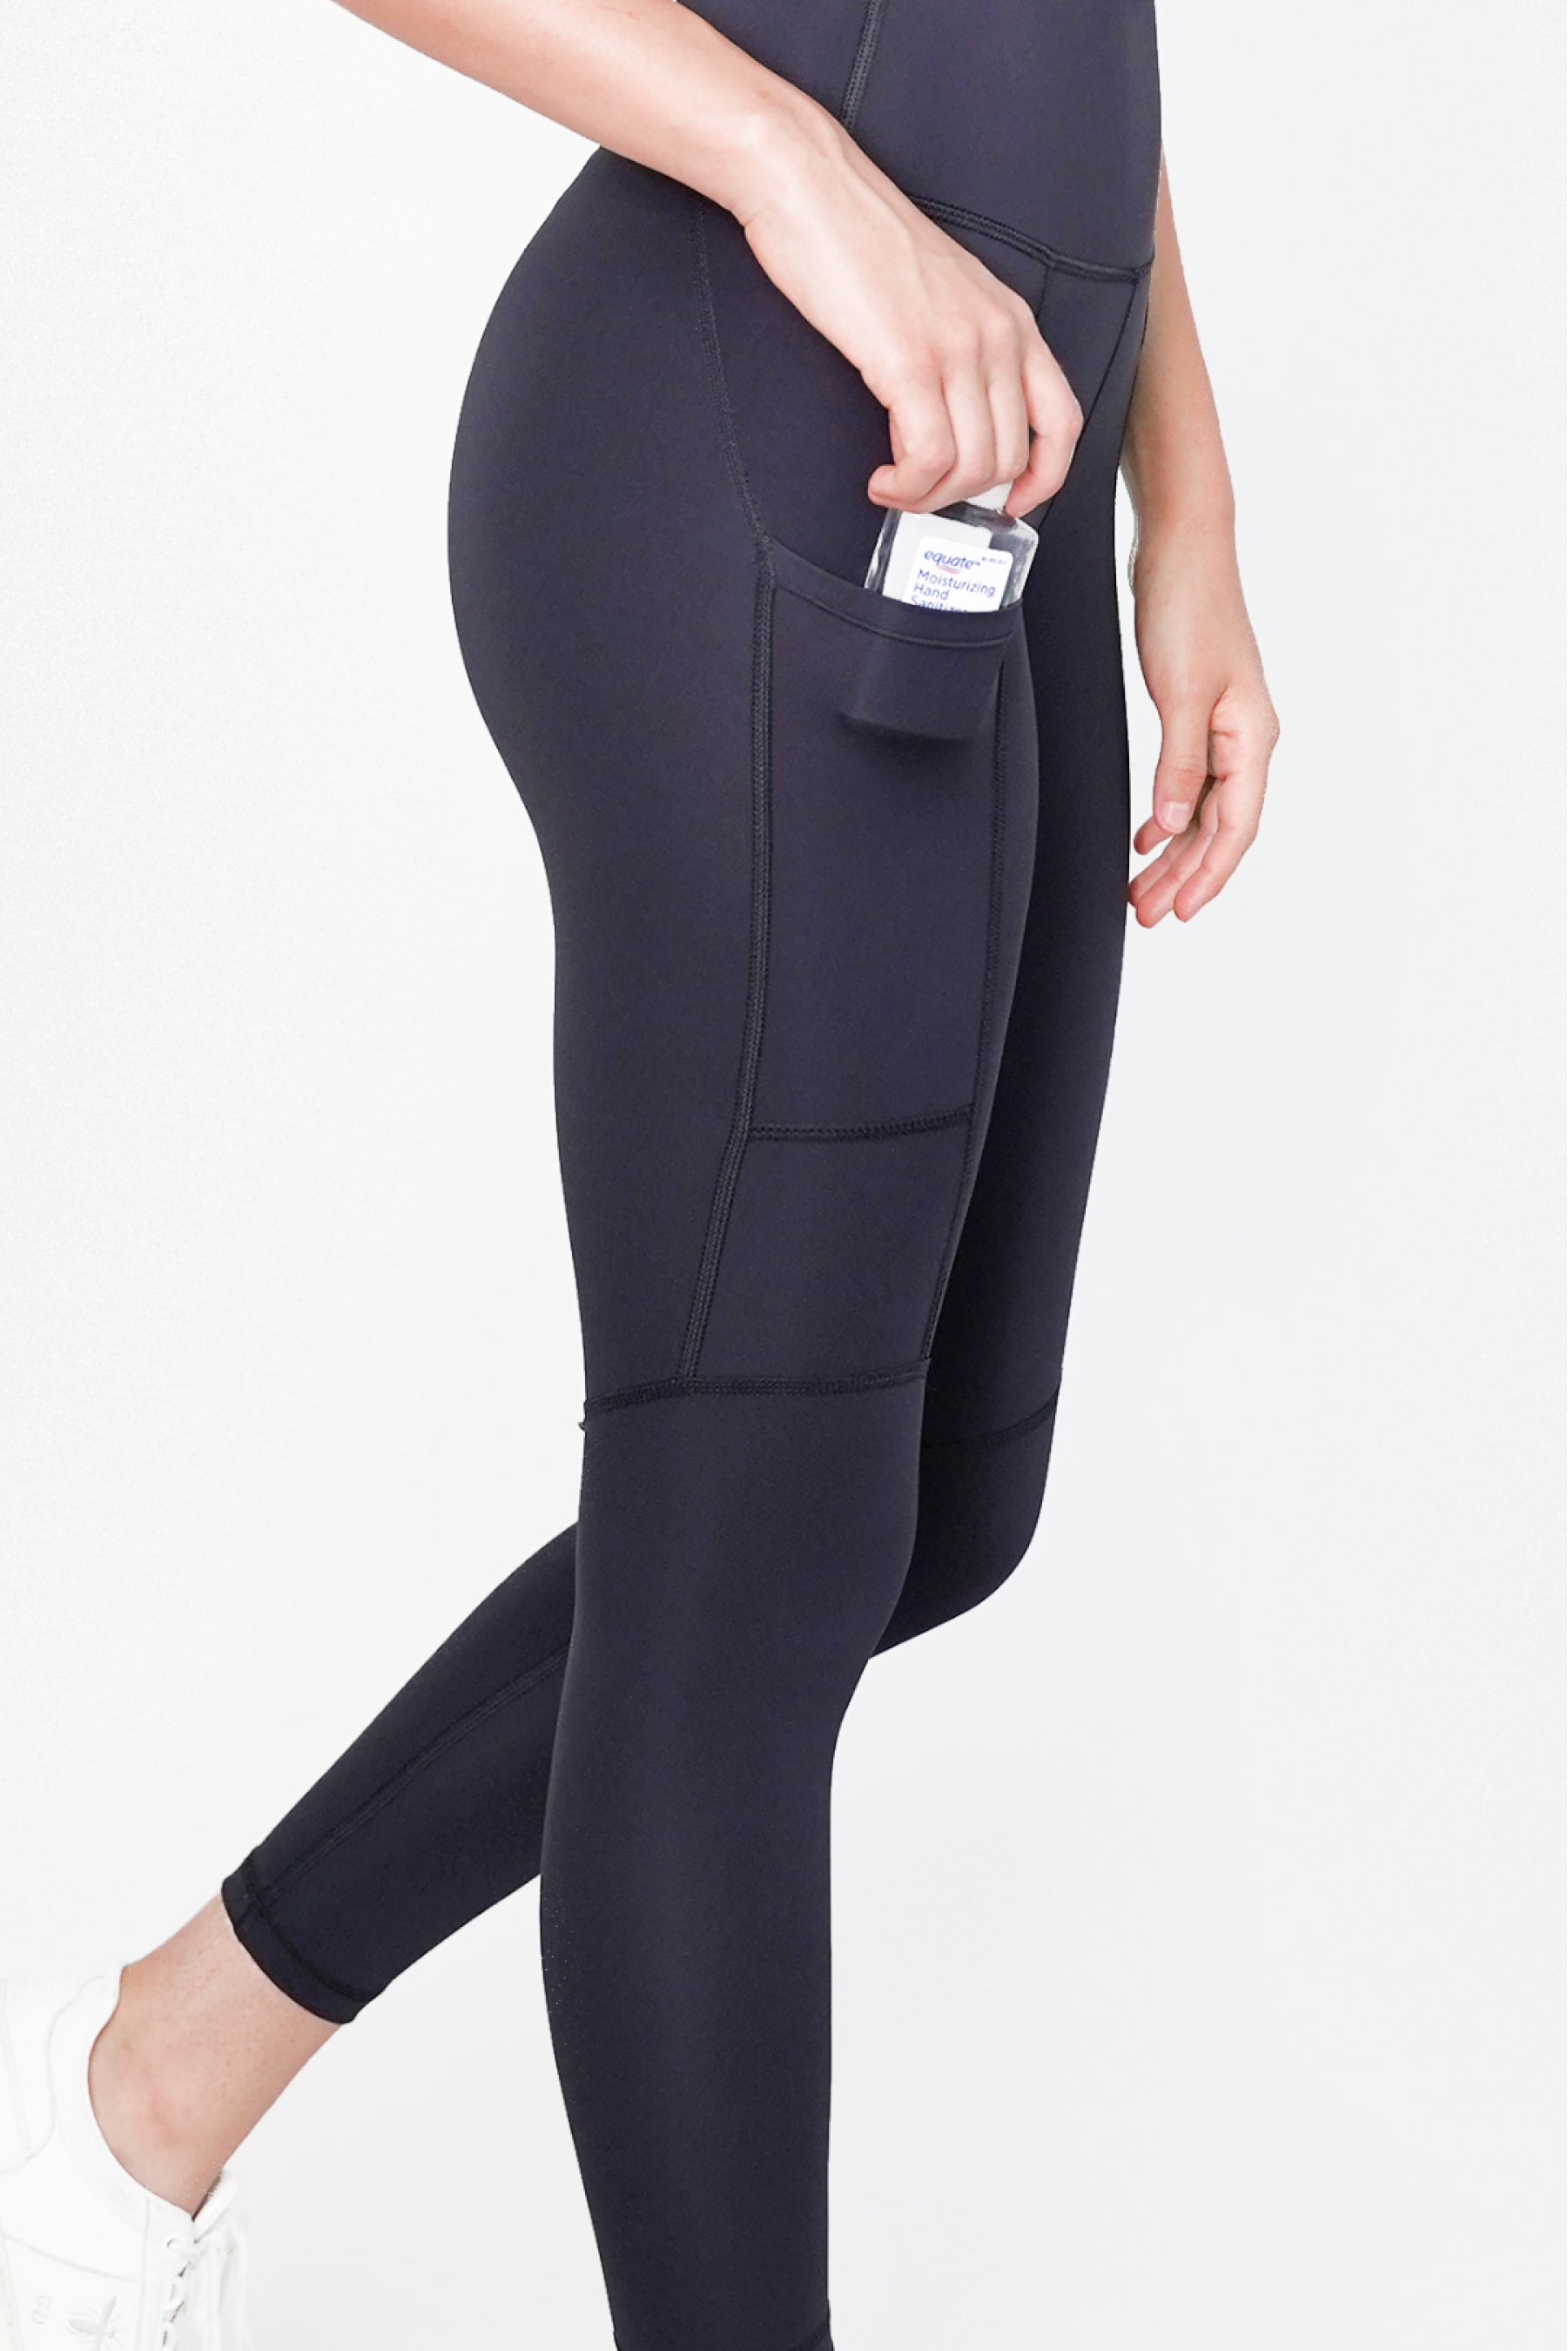 Kirkland Signature Brushed Leggings with Side Pockets Size XXL - $18 - From  Haley